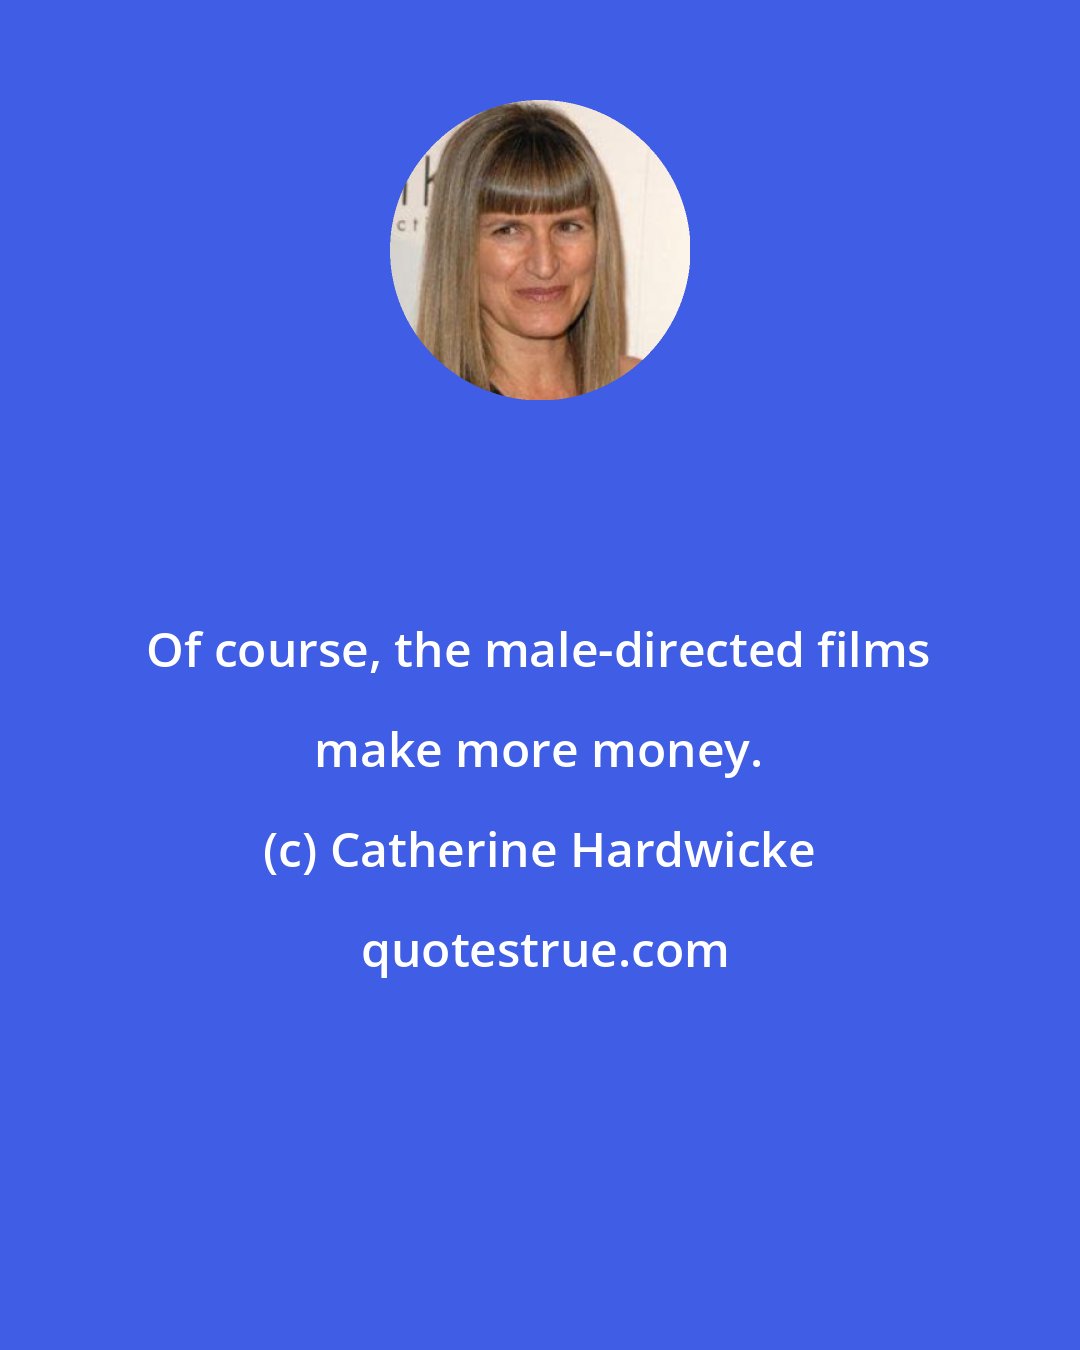 Catherine Hardwicke: Of course, the male-directed films make more money.